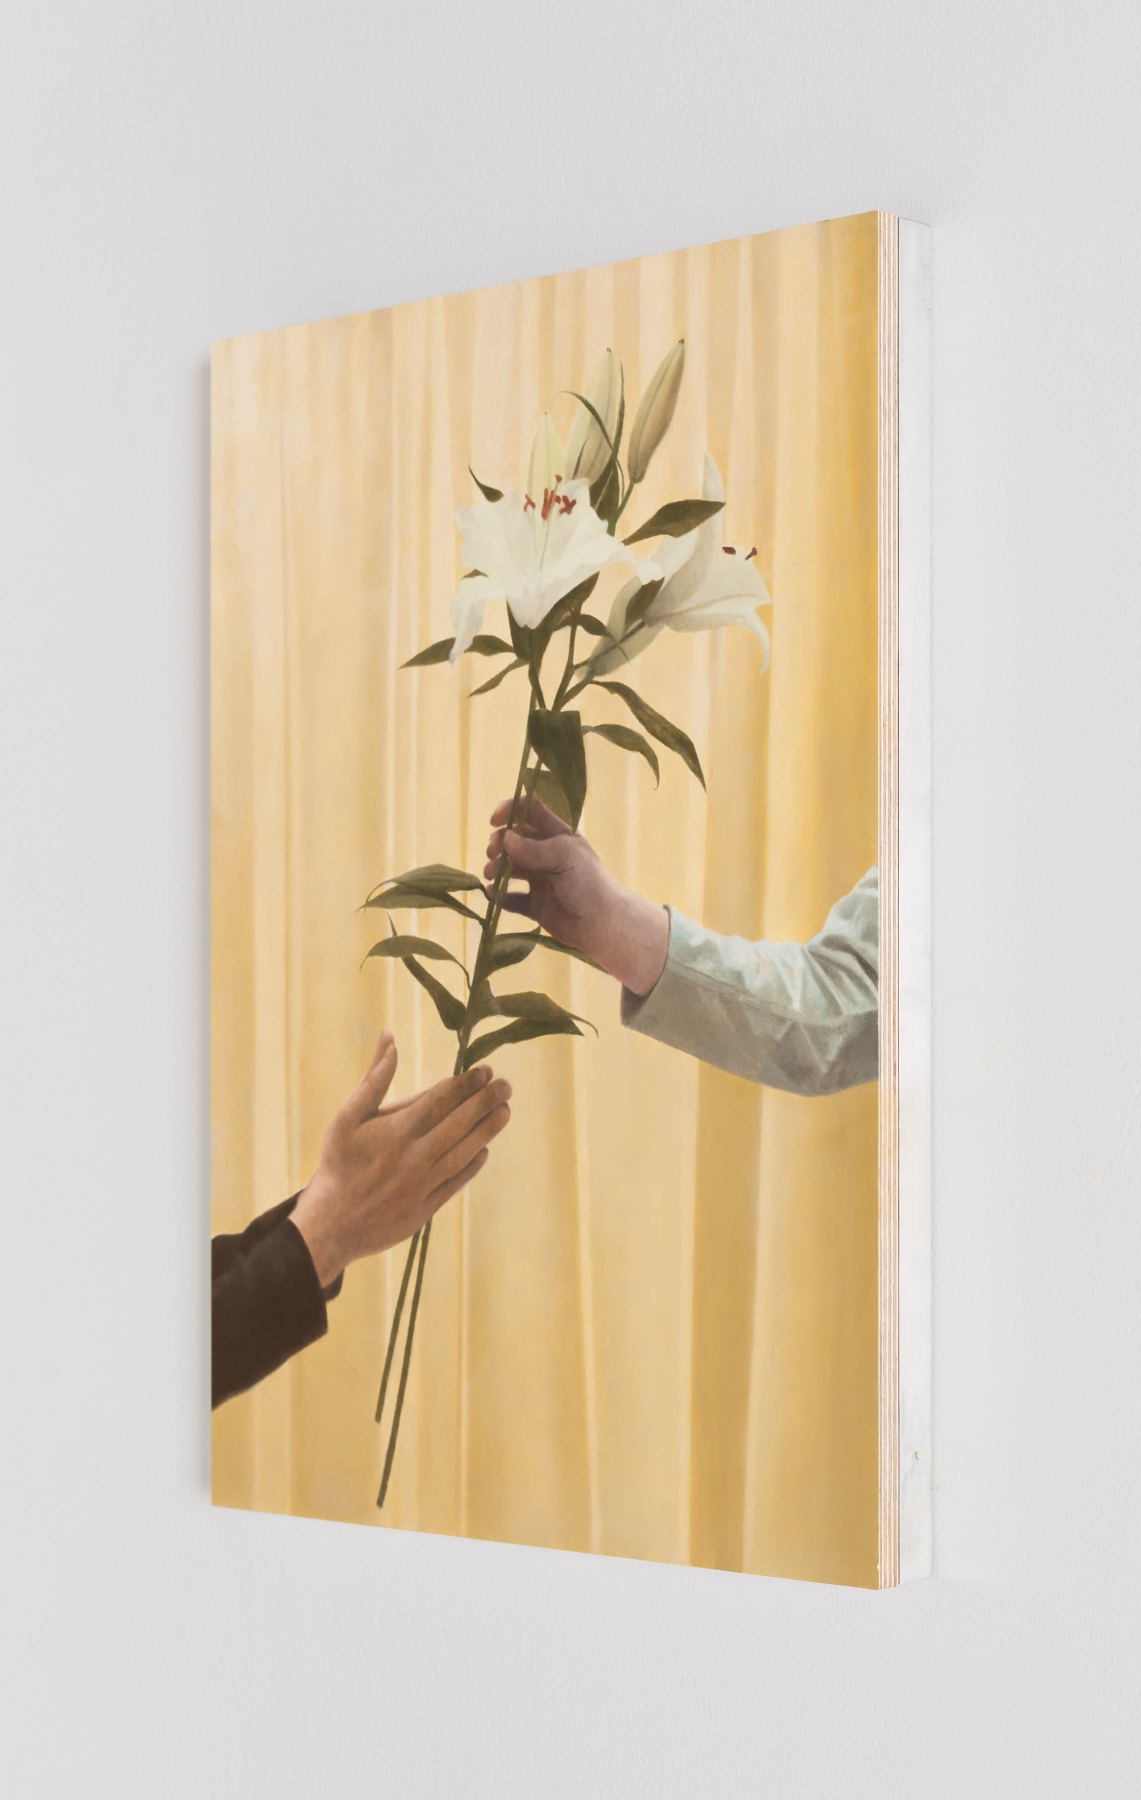 Paul Winstanley&nbsp;
Lilies 2 (After Filippo Lippi), 2019
oil on gesso on panel
48 x 34 X 3.2 cm / 18.9 x 13.4 X 1.3 in&nbsp;